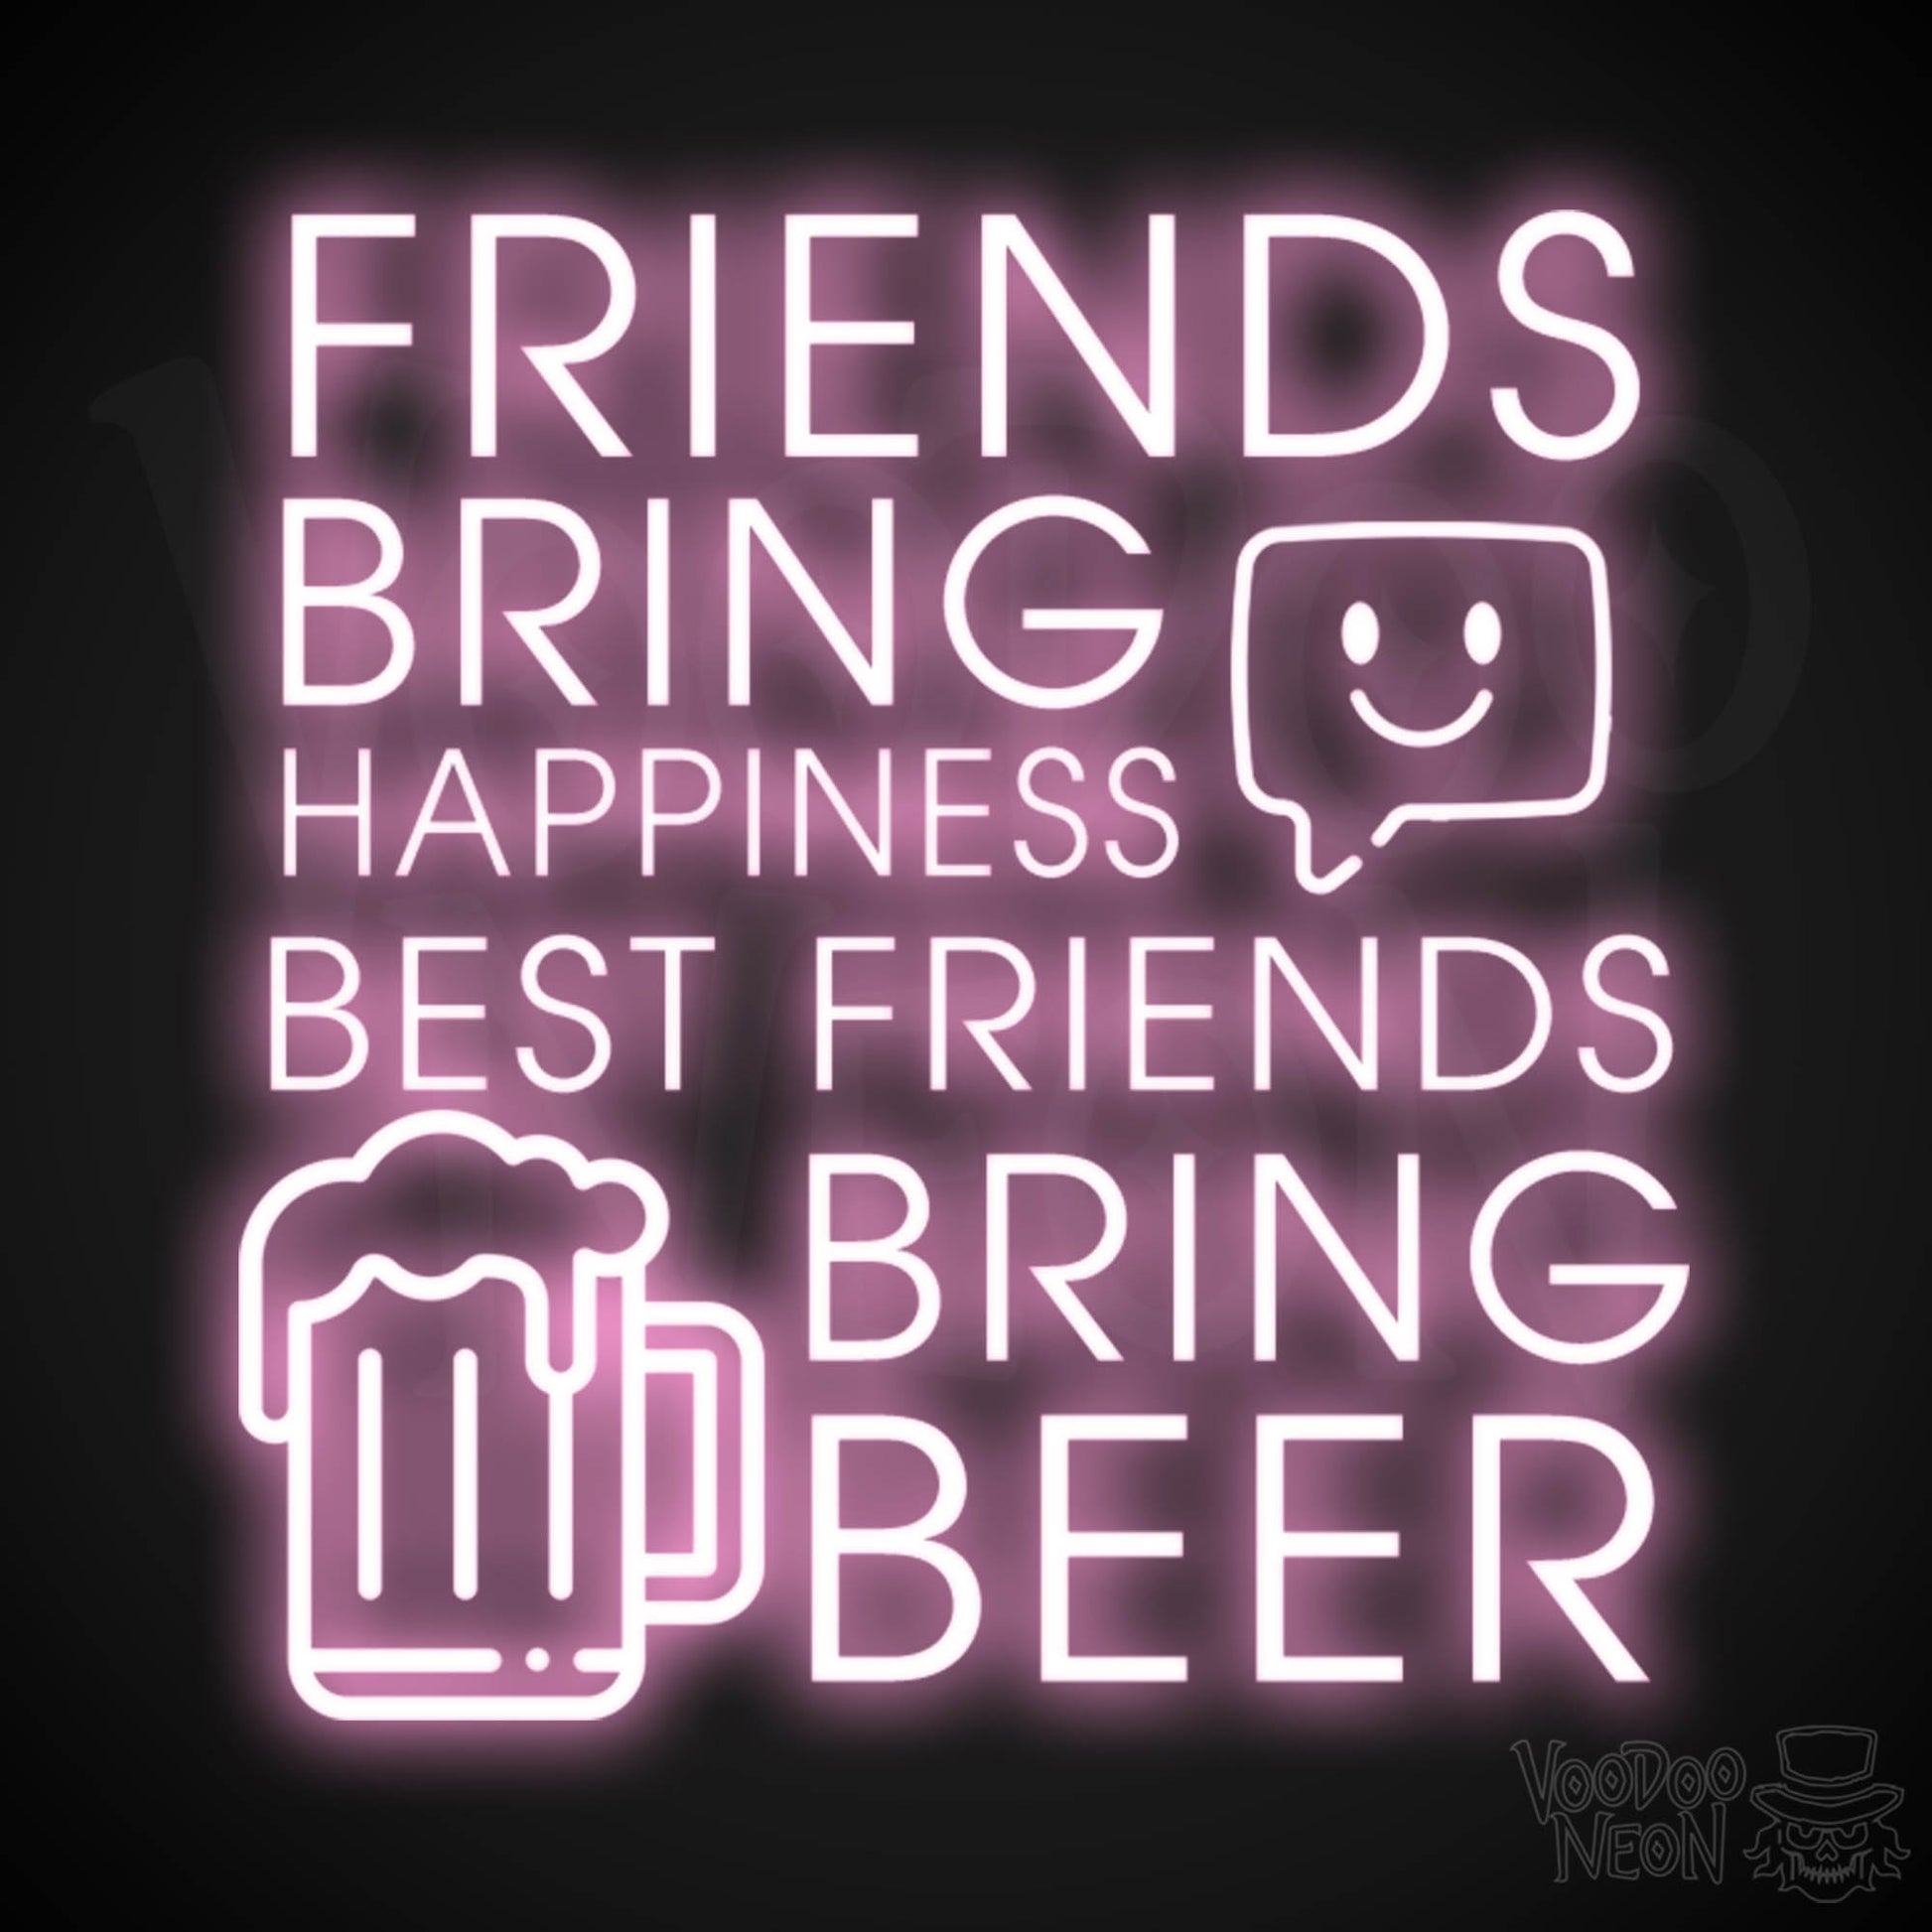 Friends Bring Happiness Best Friends Bring Beer Neon Sign - LED Lights Wall Art - Color Light Pink